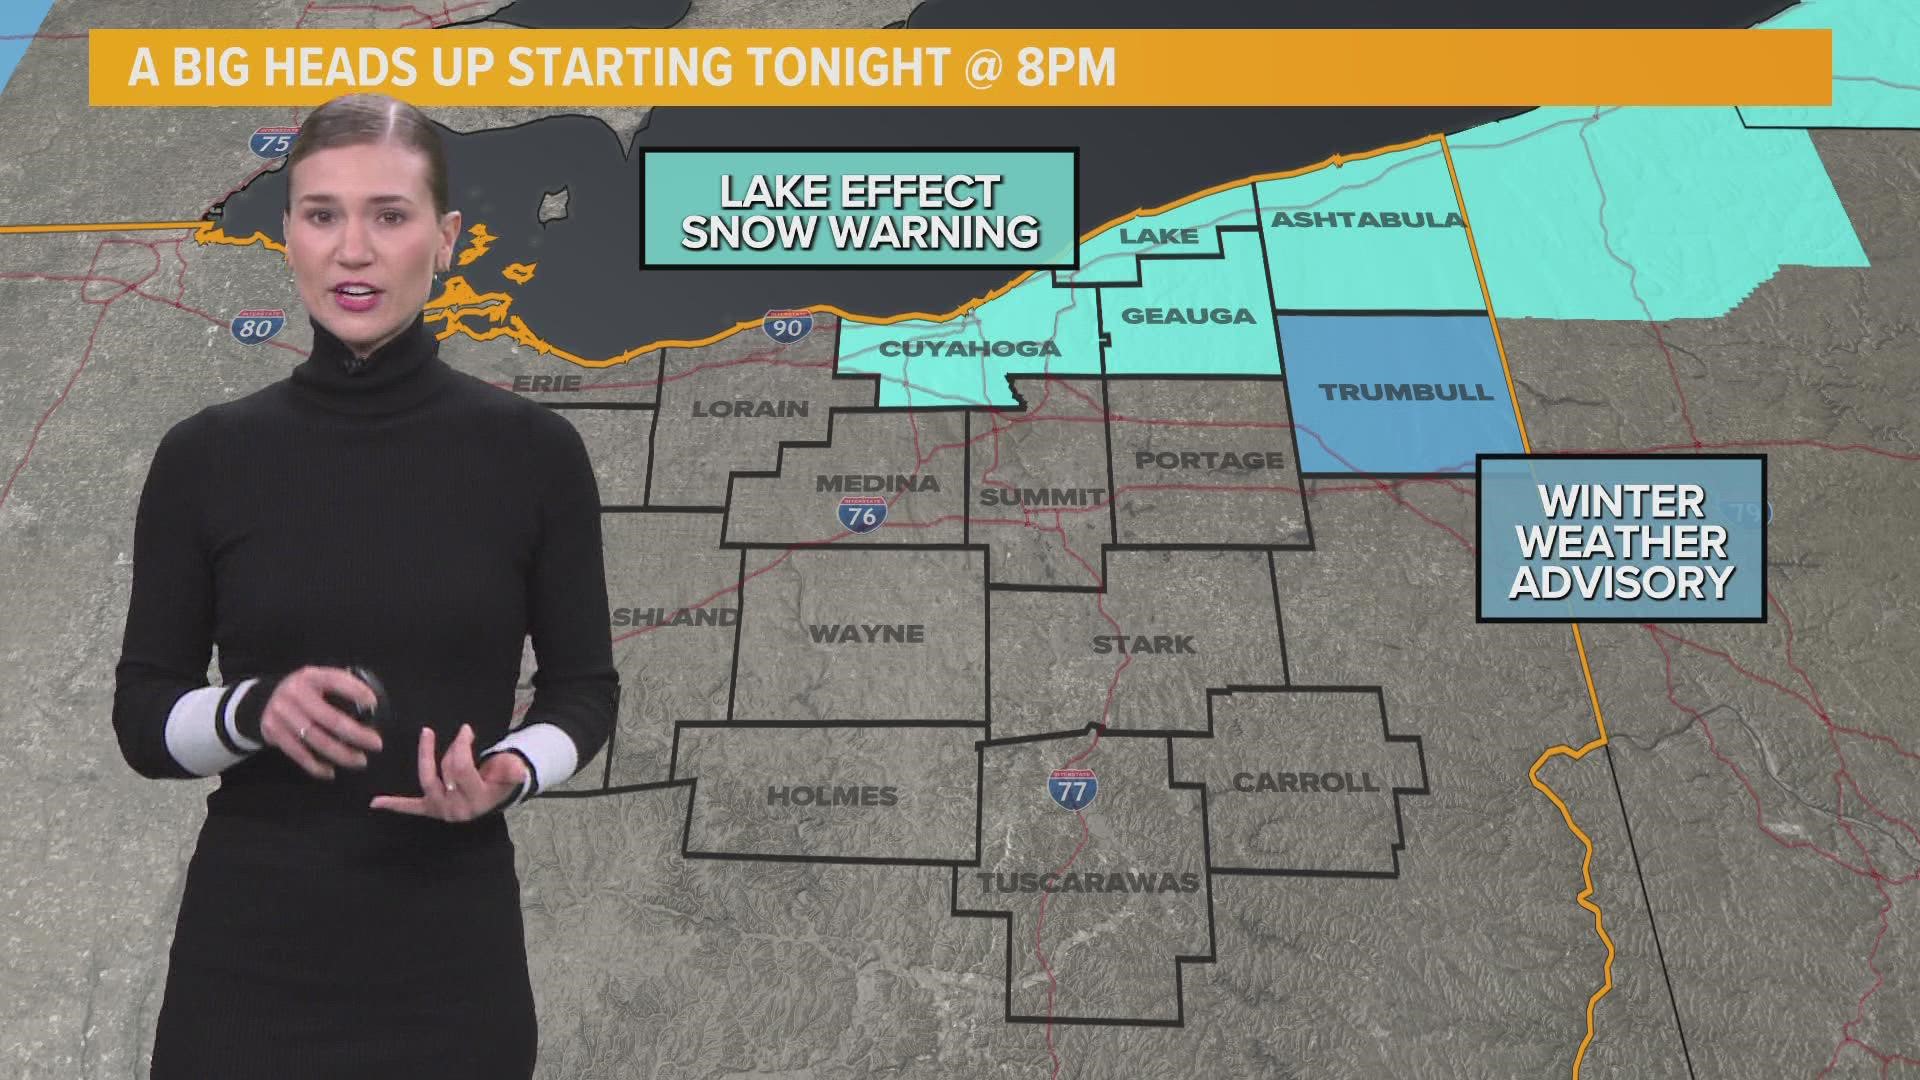 3News' Payton Domschke says multiple Northeast Ohio counties are under a Lake Effect Snow Warning this weekend.